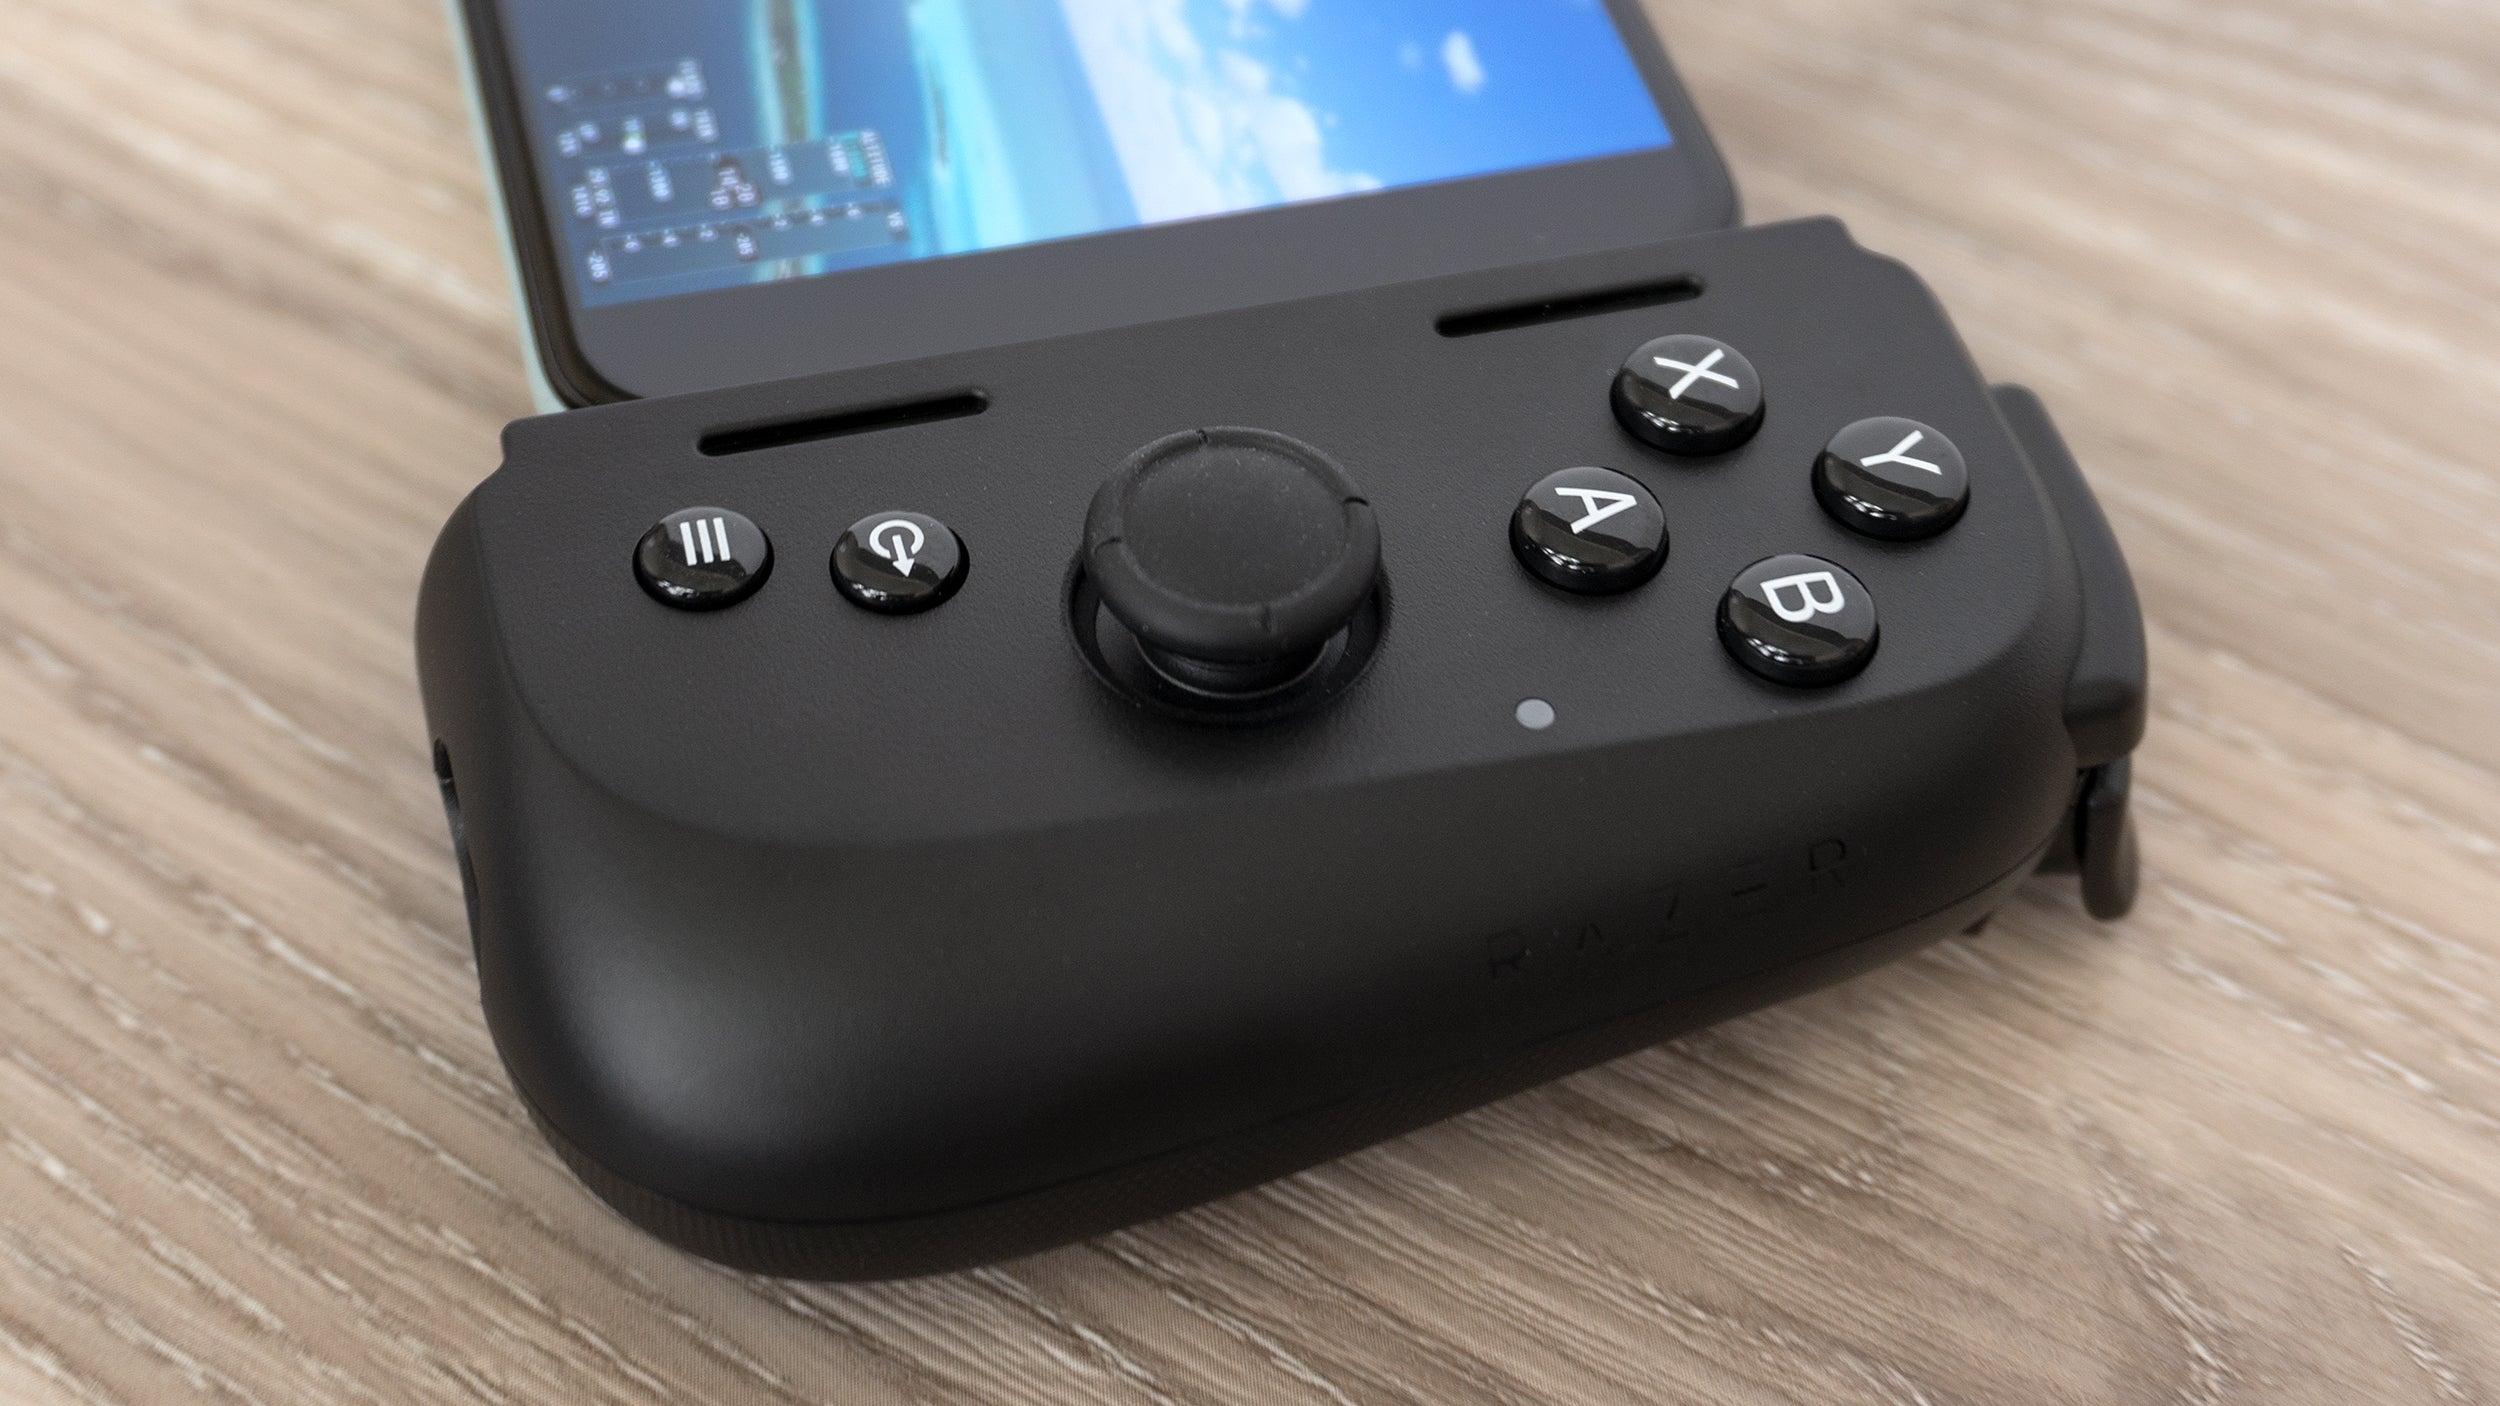 The New Razer Kishi V2 Is a Better Way to Turn Your Android Smartphone Into a Handheld Console